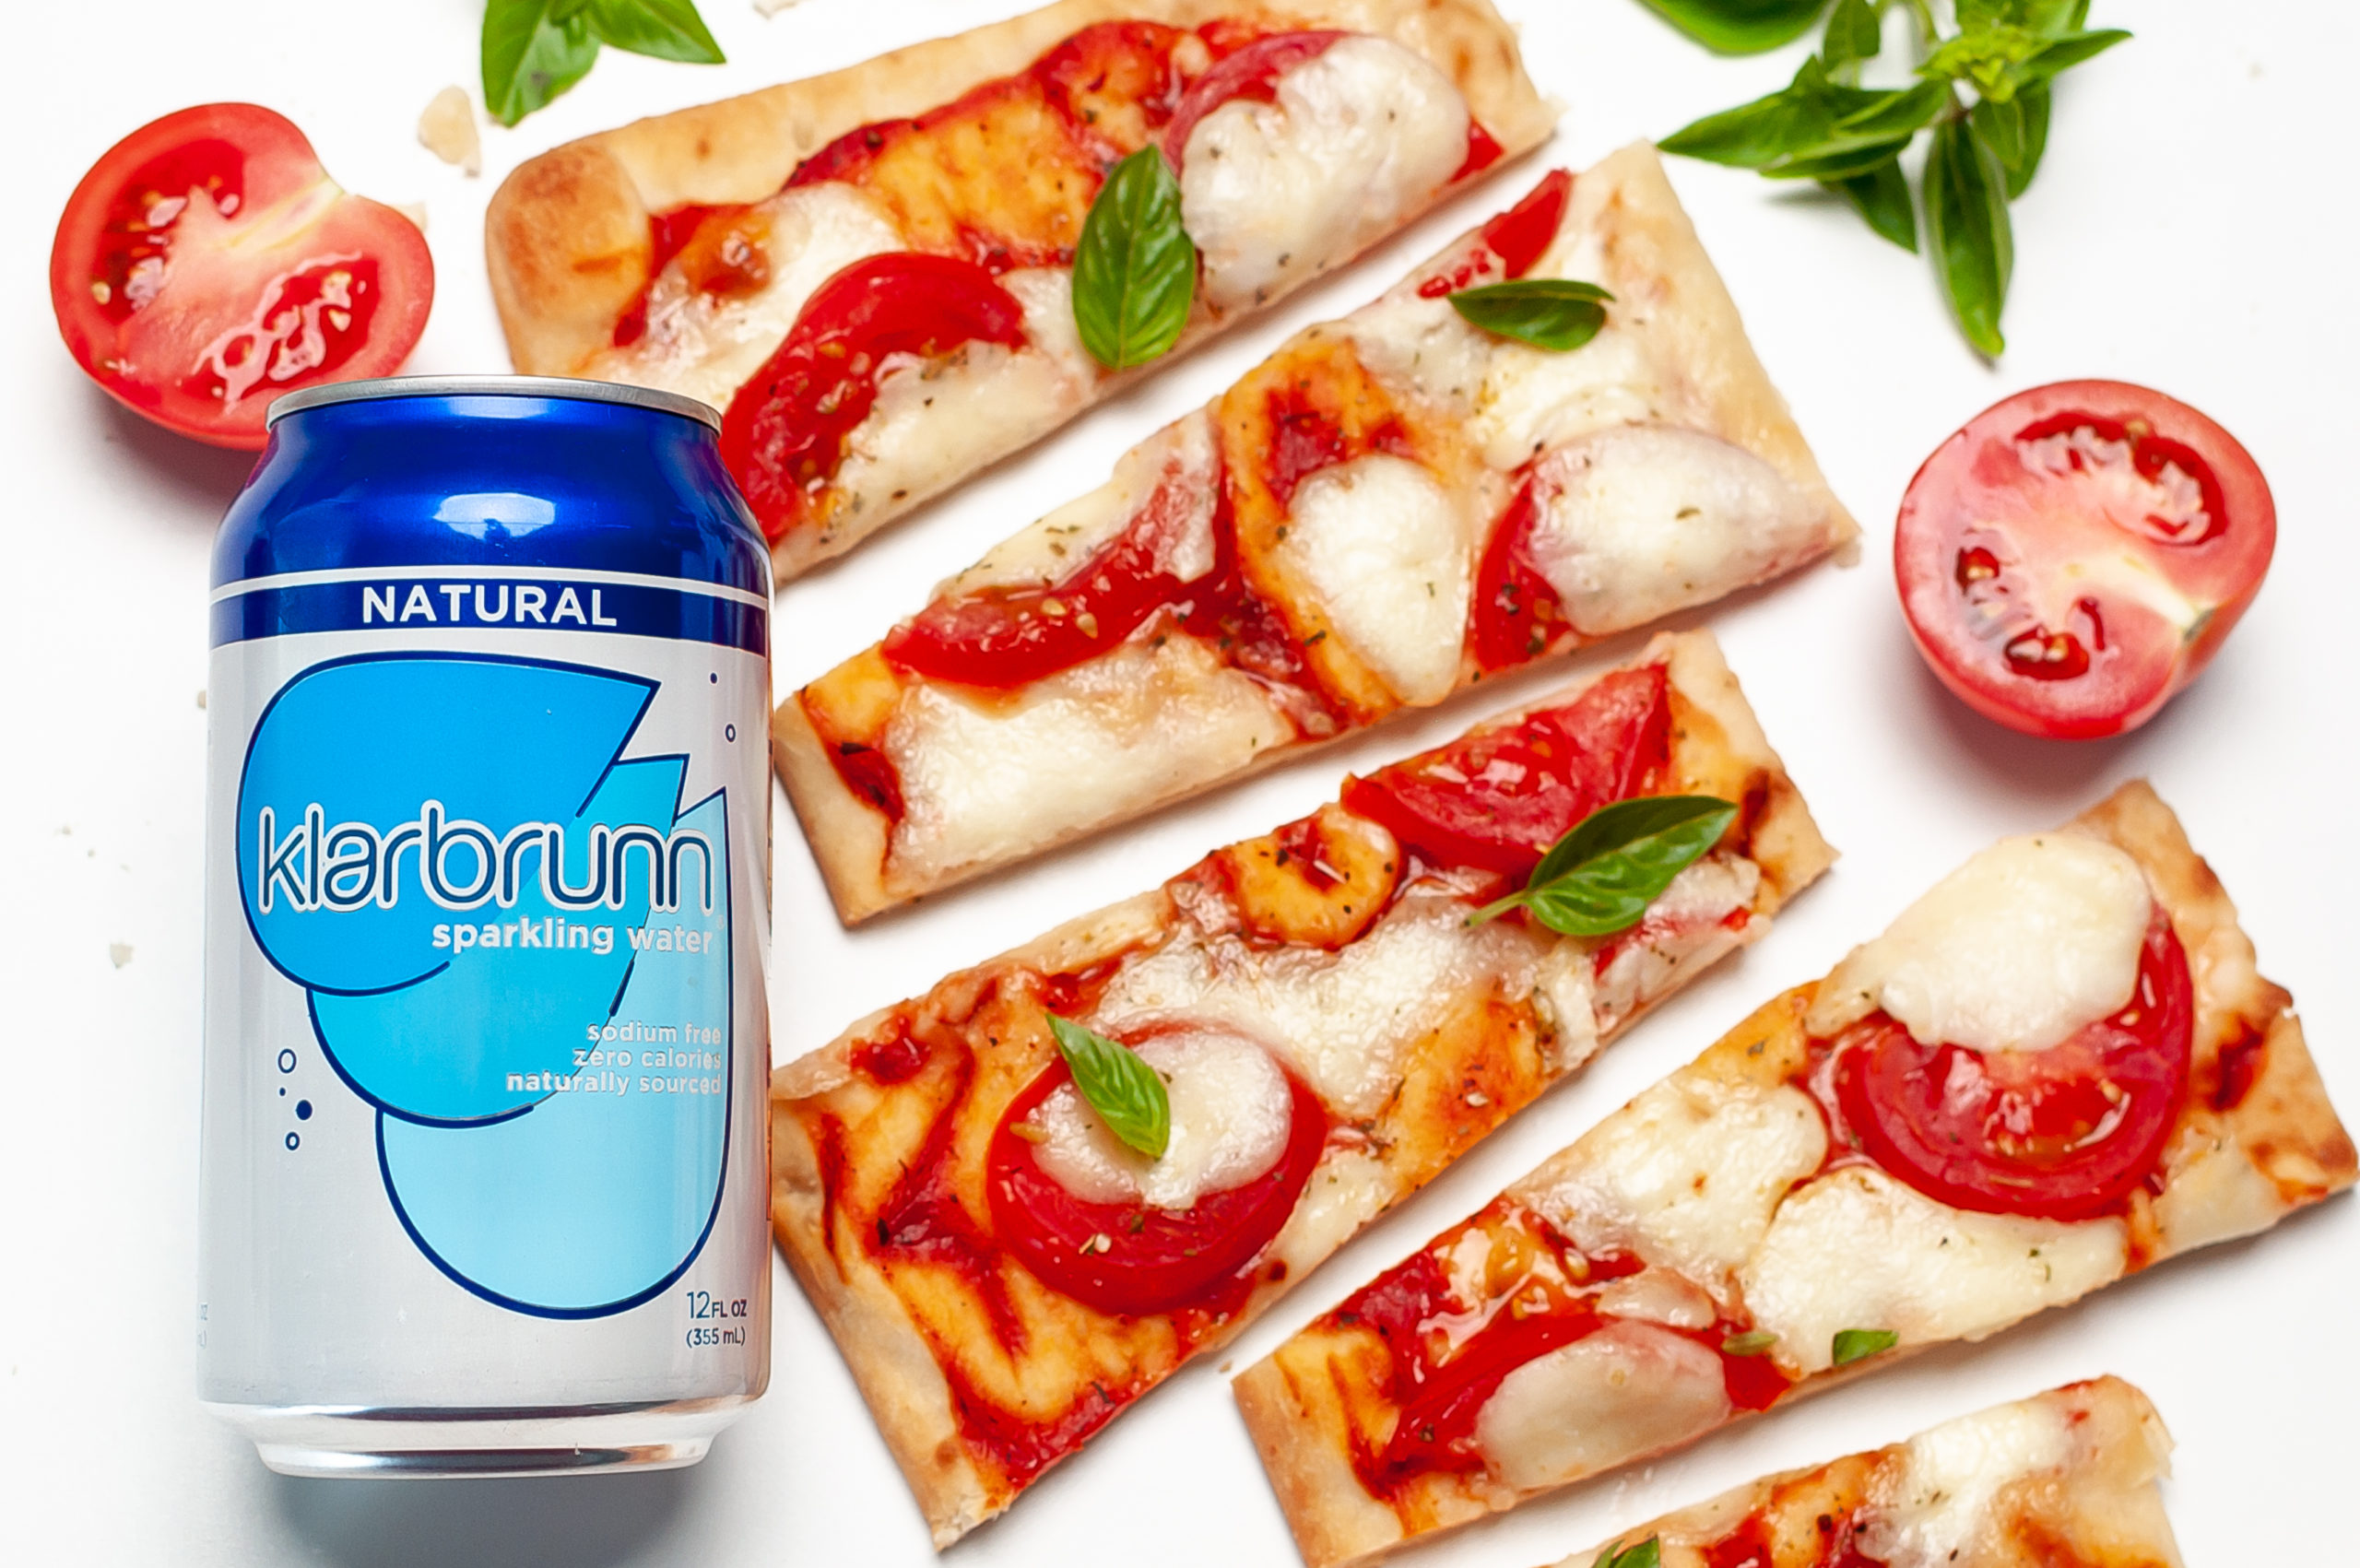 Flatbread pizza next to a can of Klarbrunn.